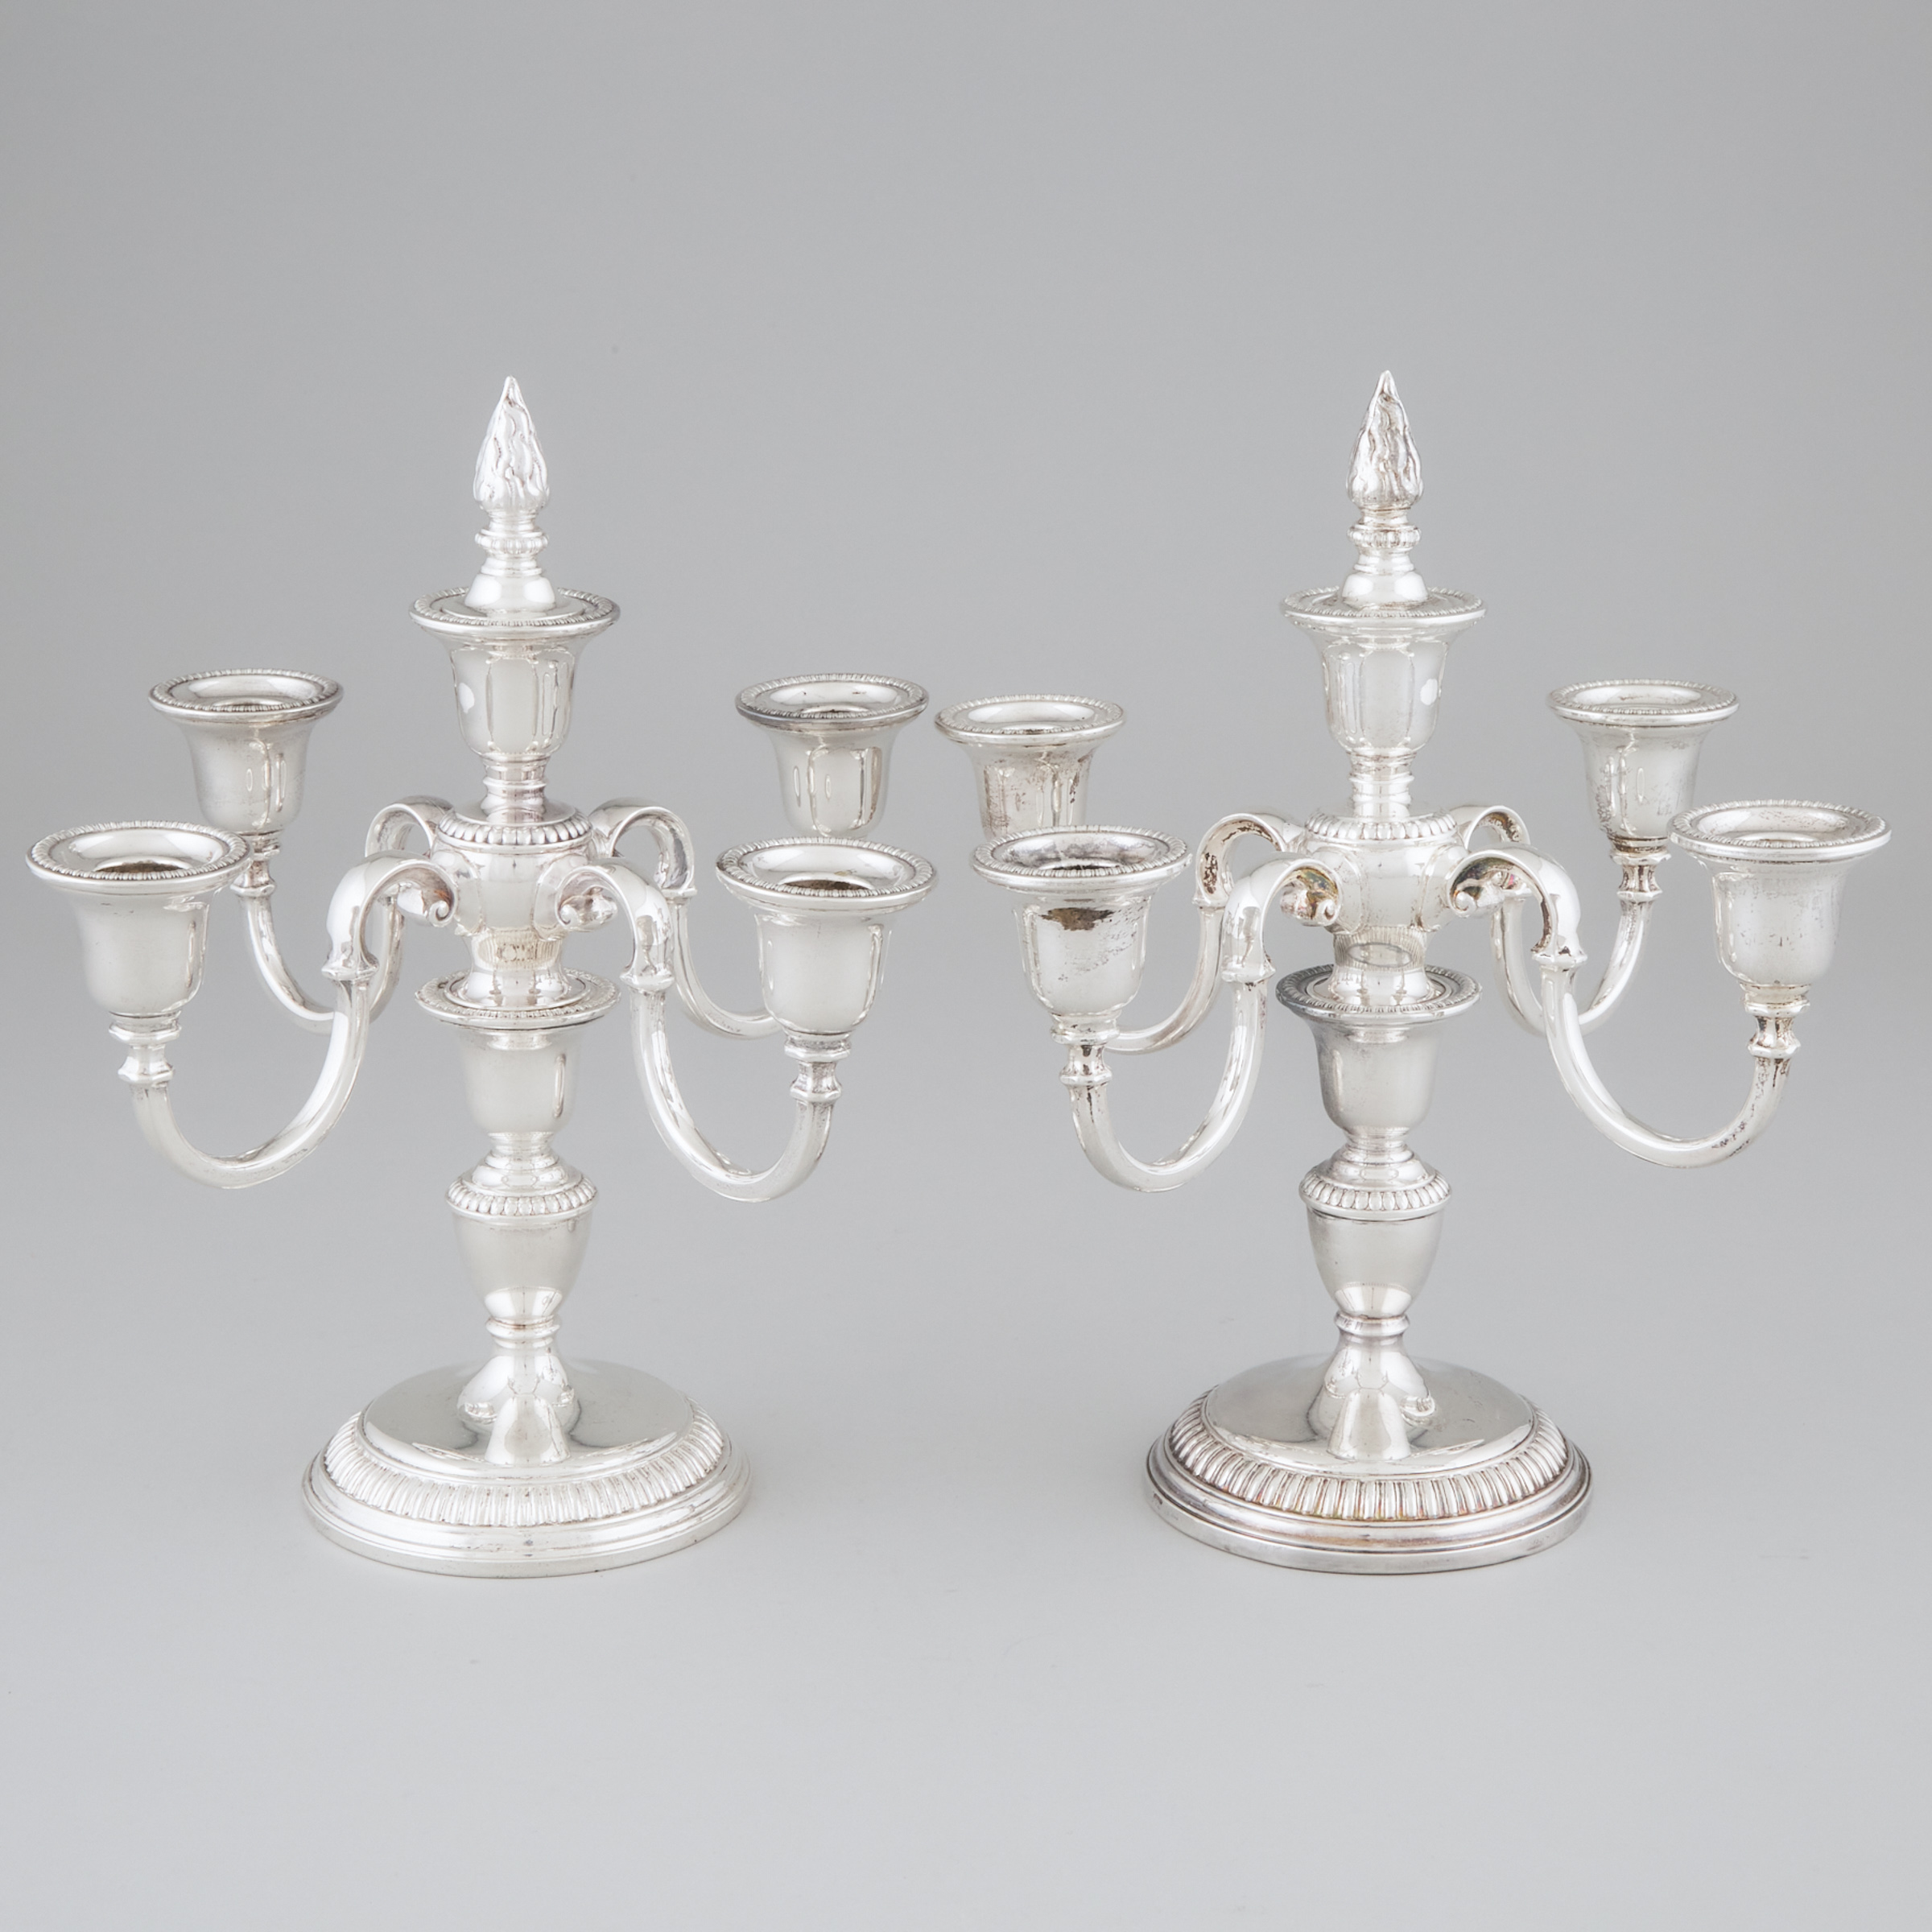 Pair of Canadian Silver Five-Light Candelabra, Henry Birks & Sons, Montreal, Que., 1961/62